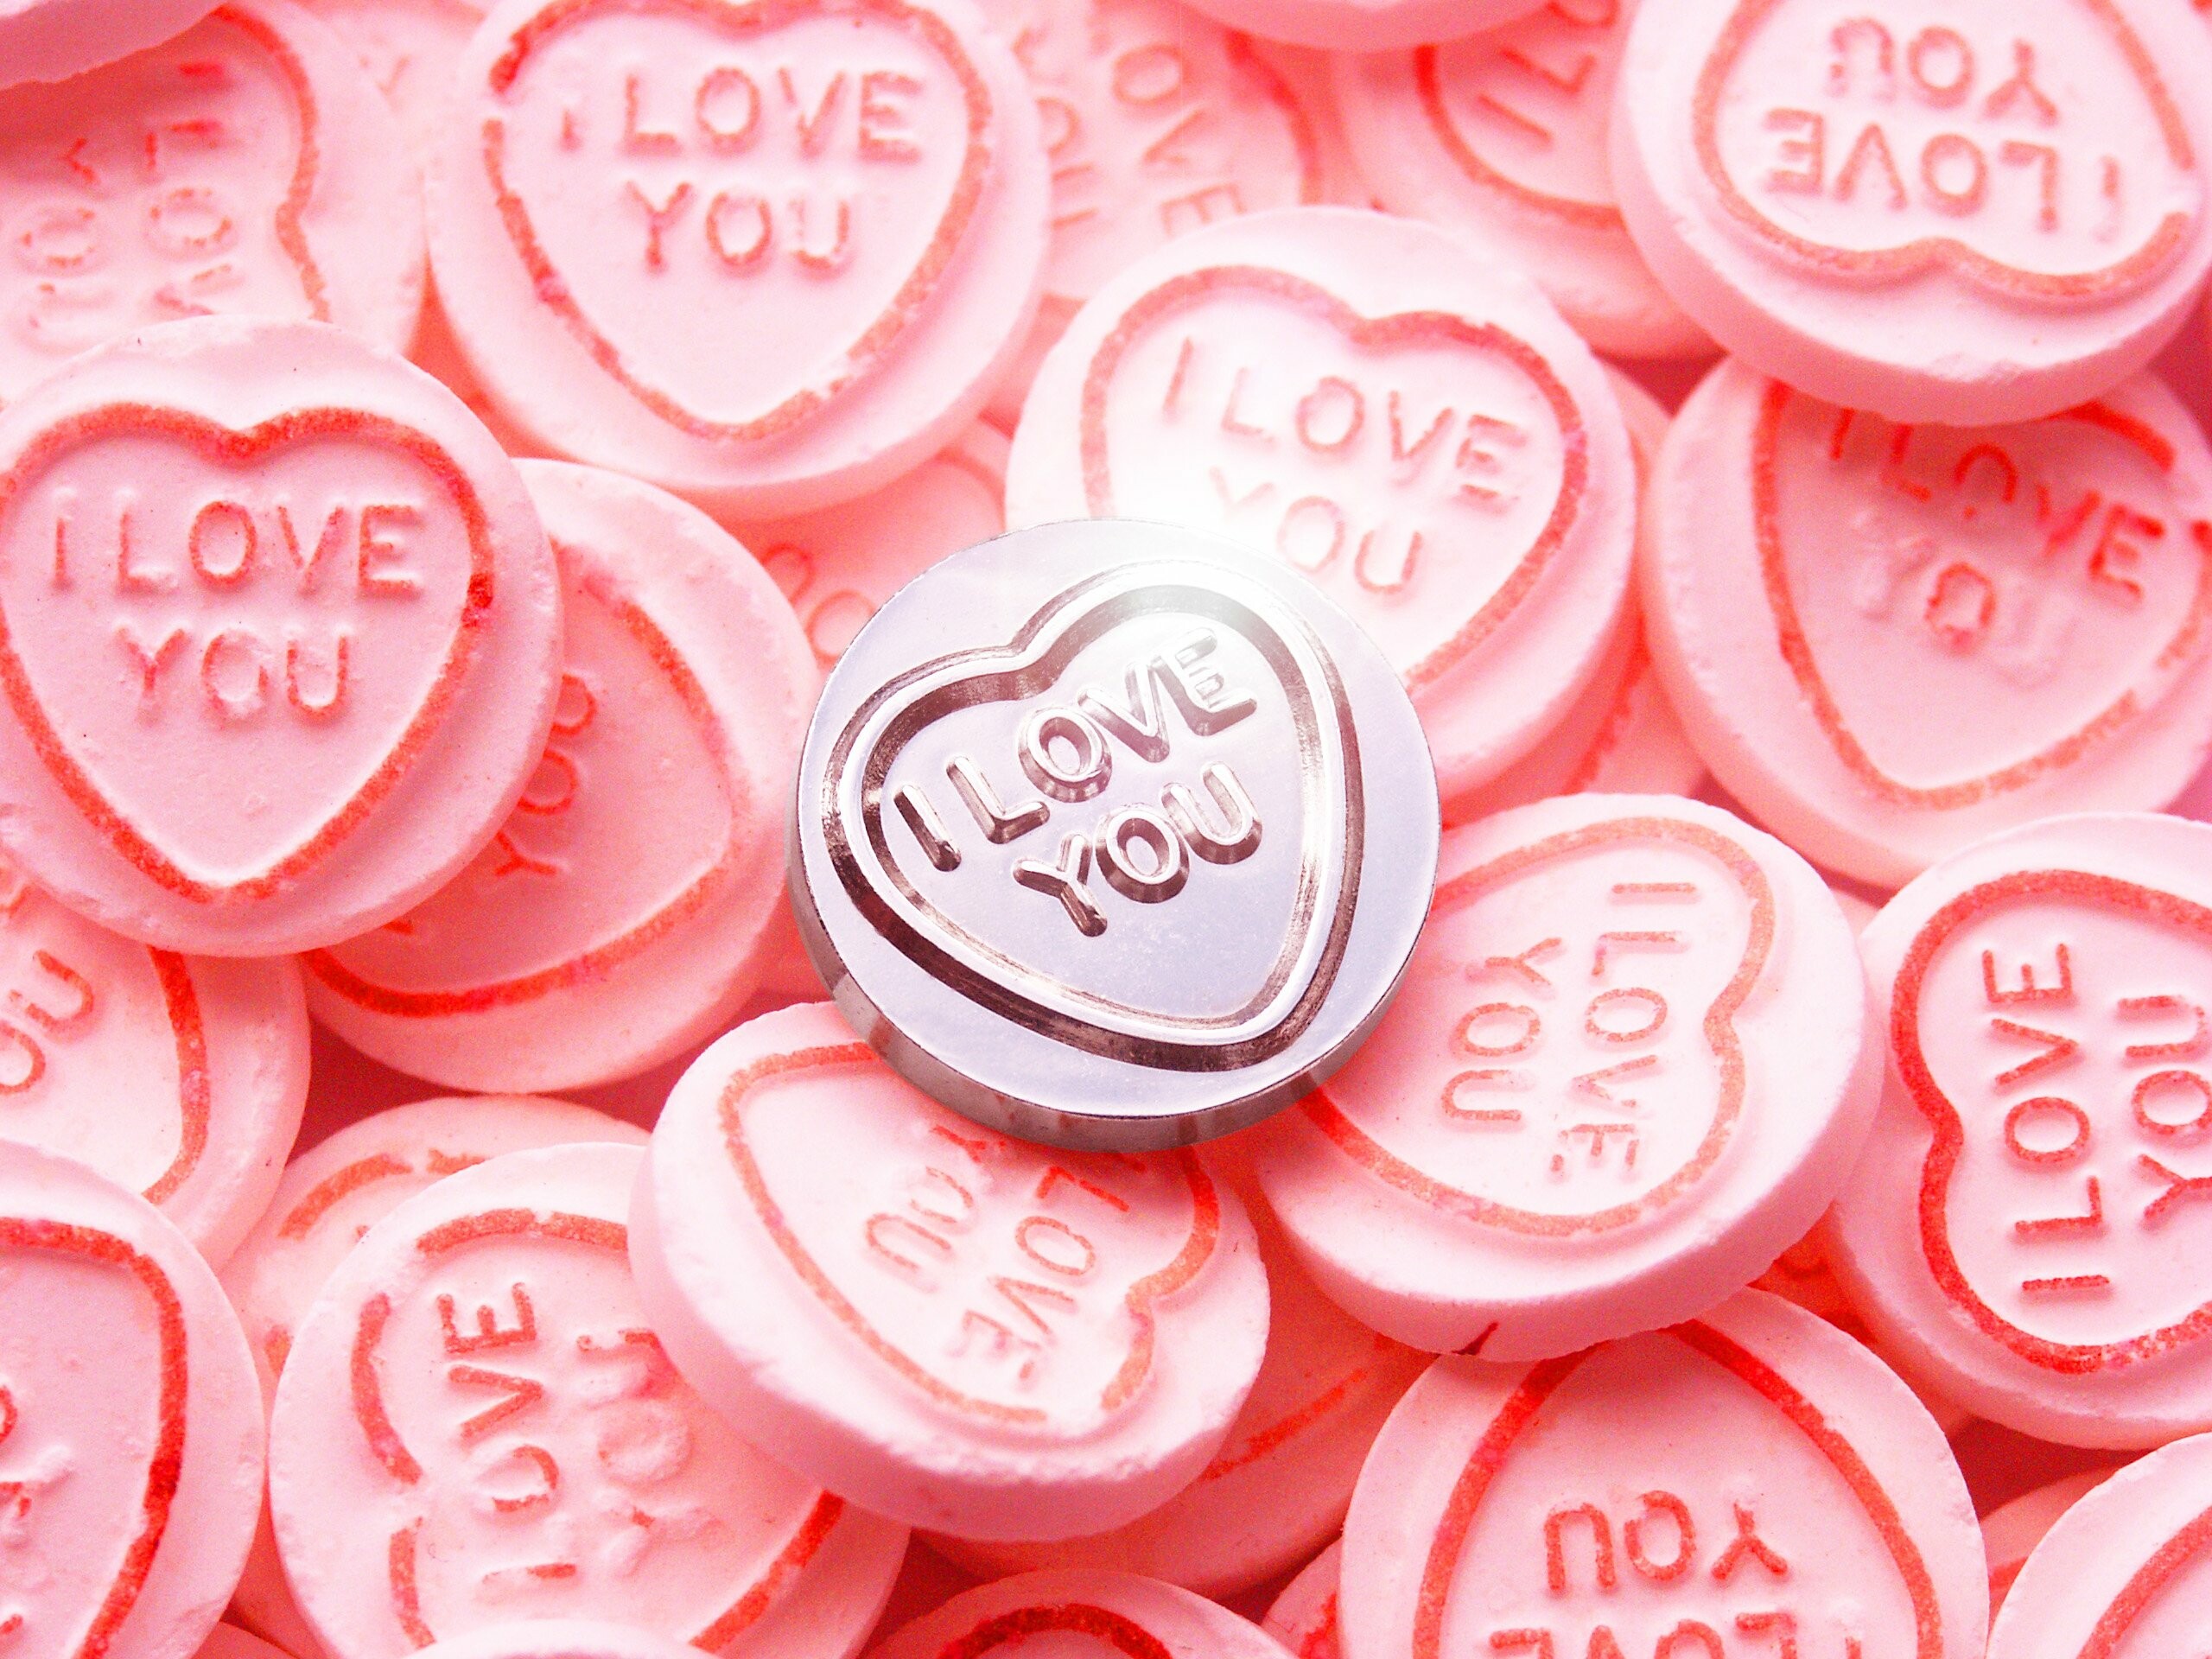 Sweets: Conversation hearts, Each heart is printed with a message. 2560x1920 HD Background.